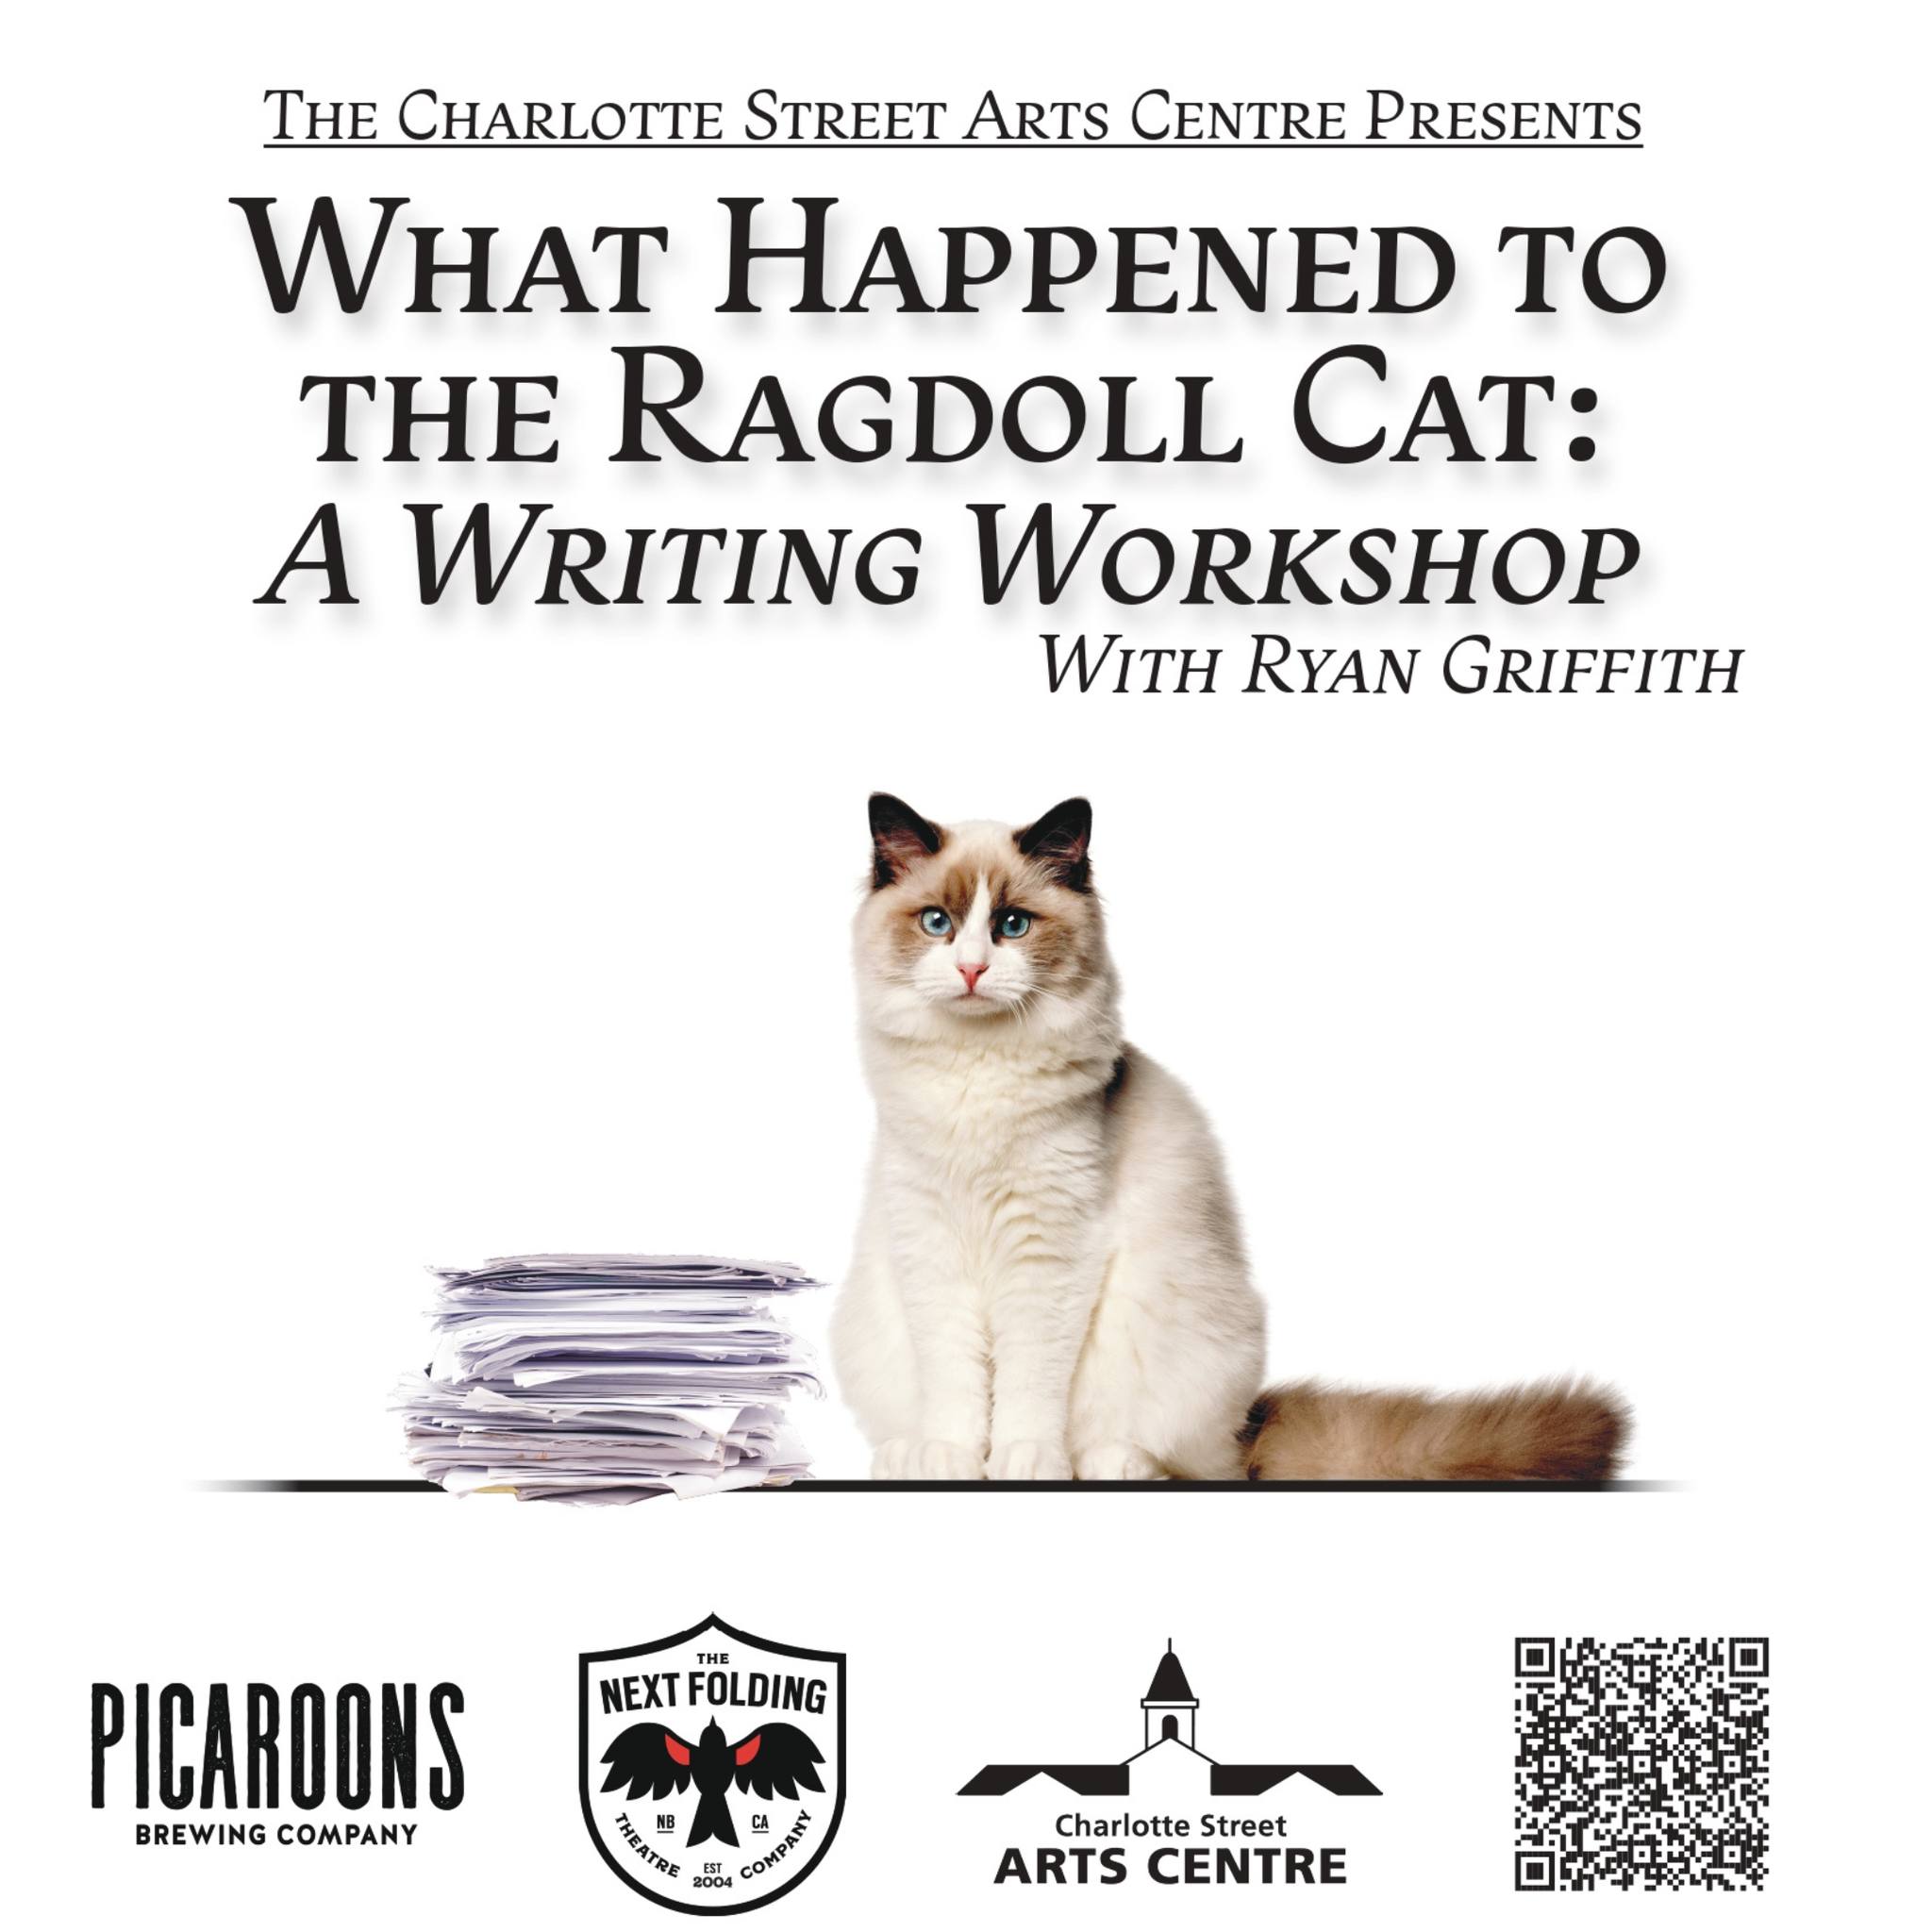 Image of a white cat next to a stack of papers. Text reads: The Ragdoll Cat: A Writing Workshop with Ryan Griffith. Image of a white cat next to a stack of papers. Text reads: The Ragdoll Cat: A Writing Workshop with Ryan Griffith.